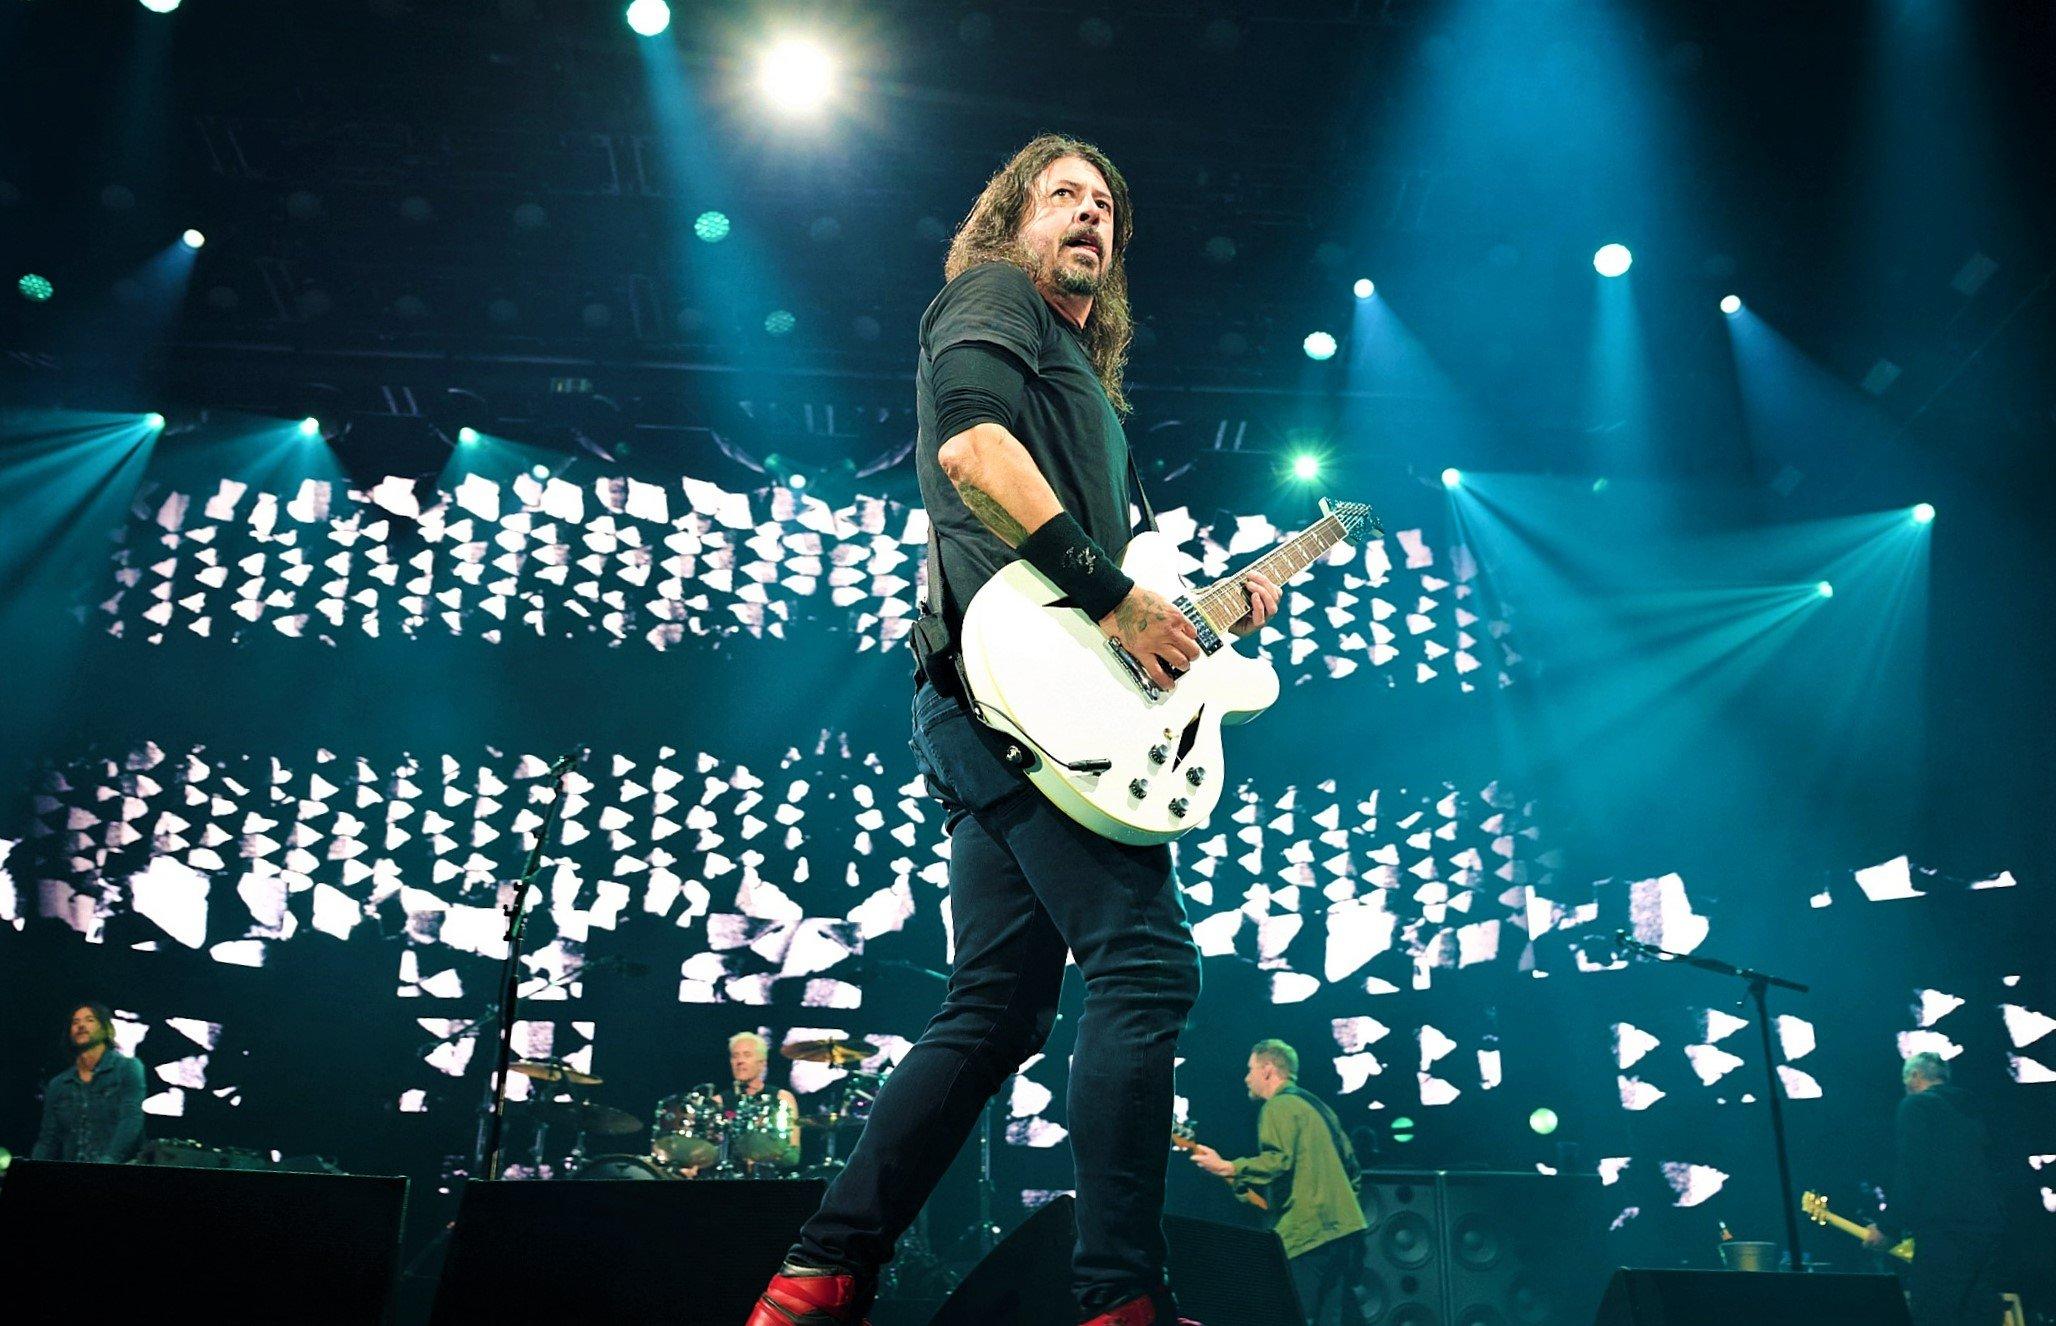 Dave Grohl of Foo Fighters Performing